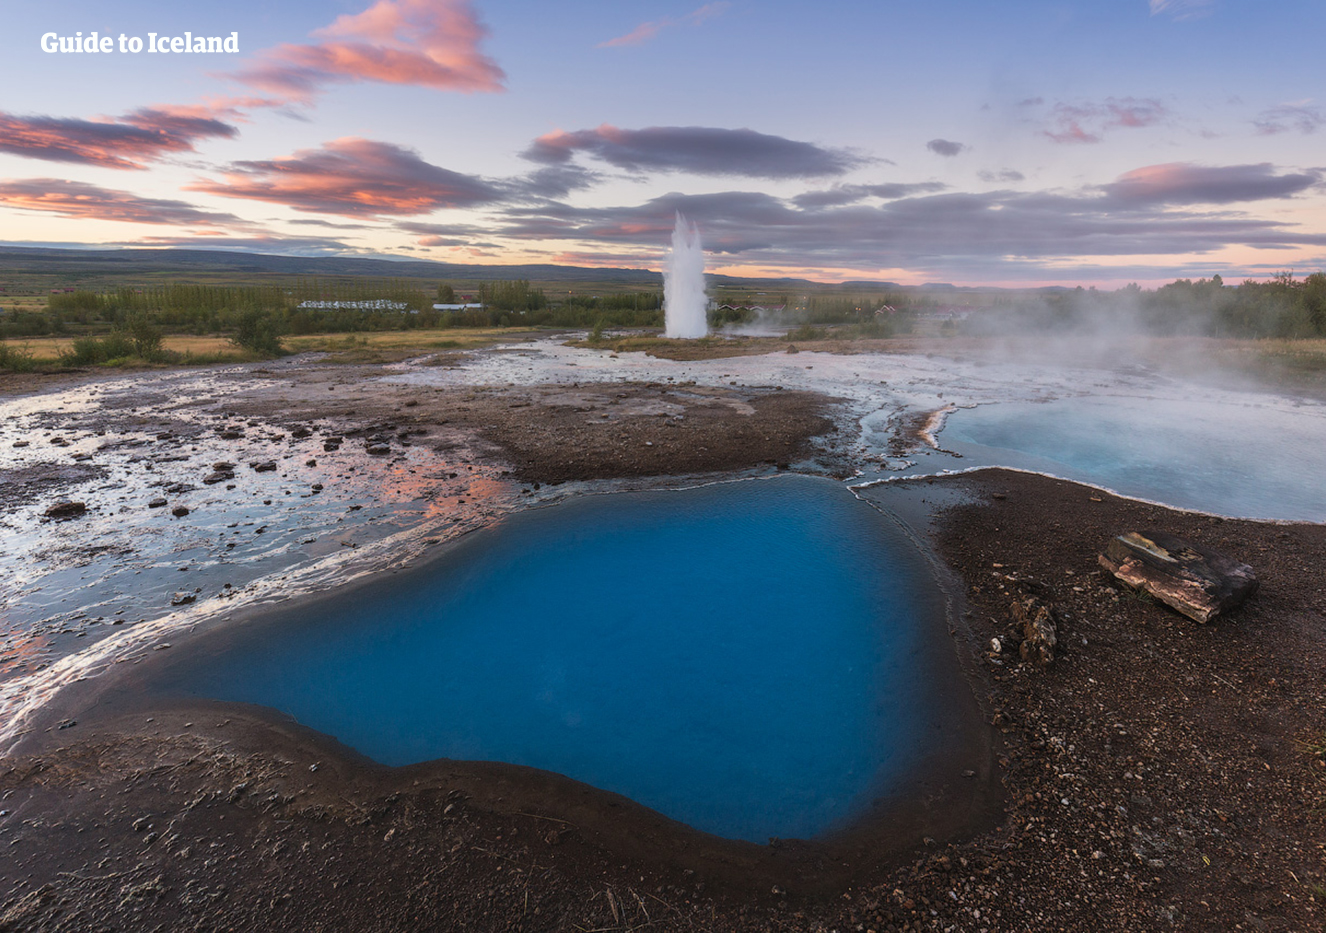 In the Geysir geothermal area you will see Strokkur erupting in magnificent waterworks displays every five to ten minutes.